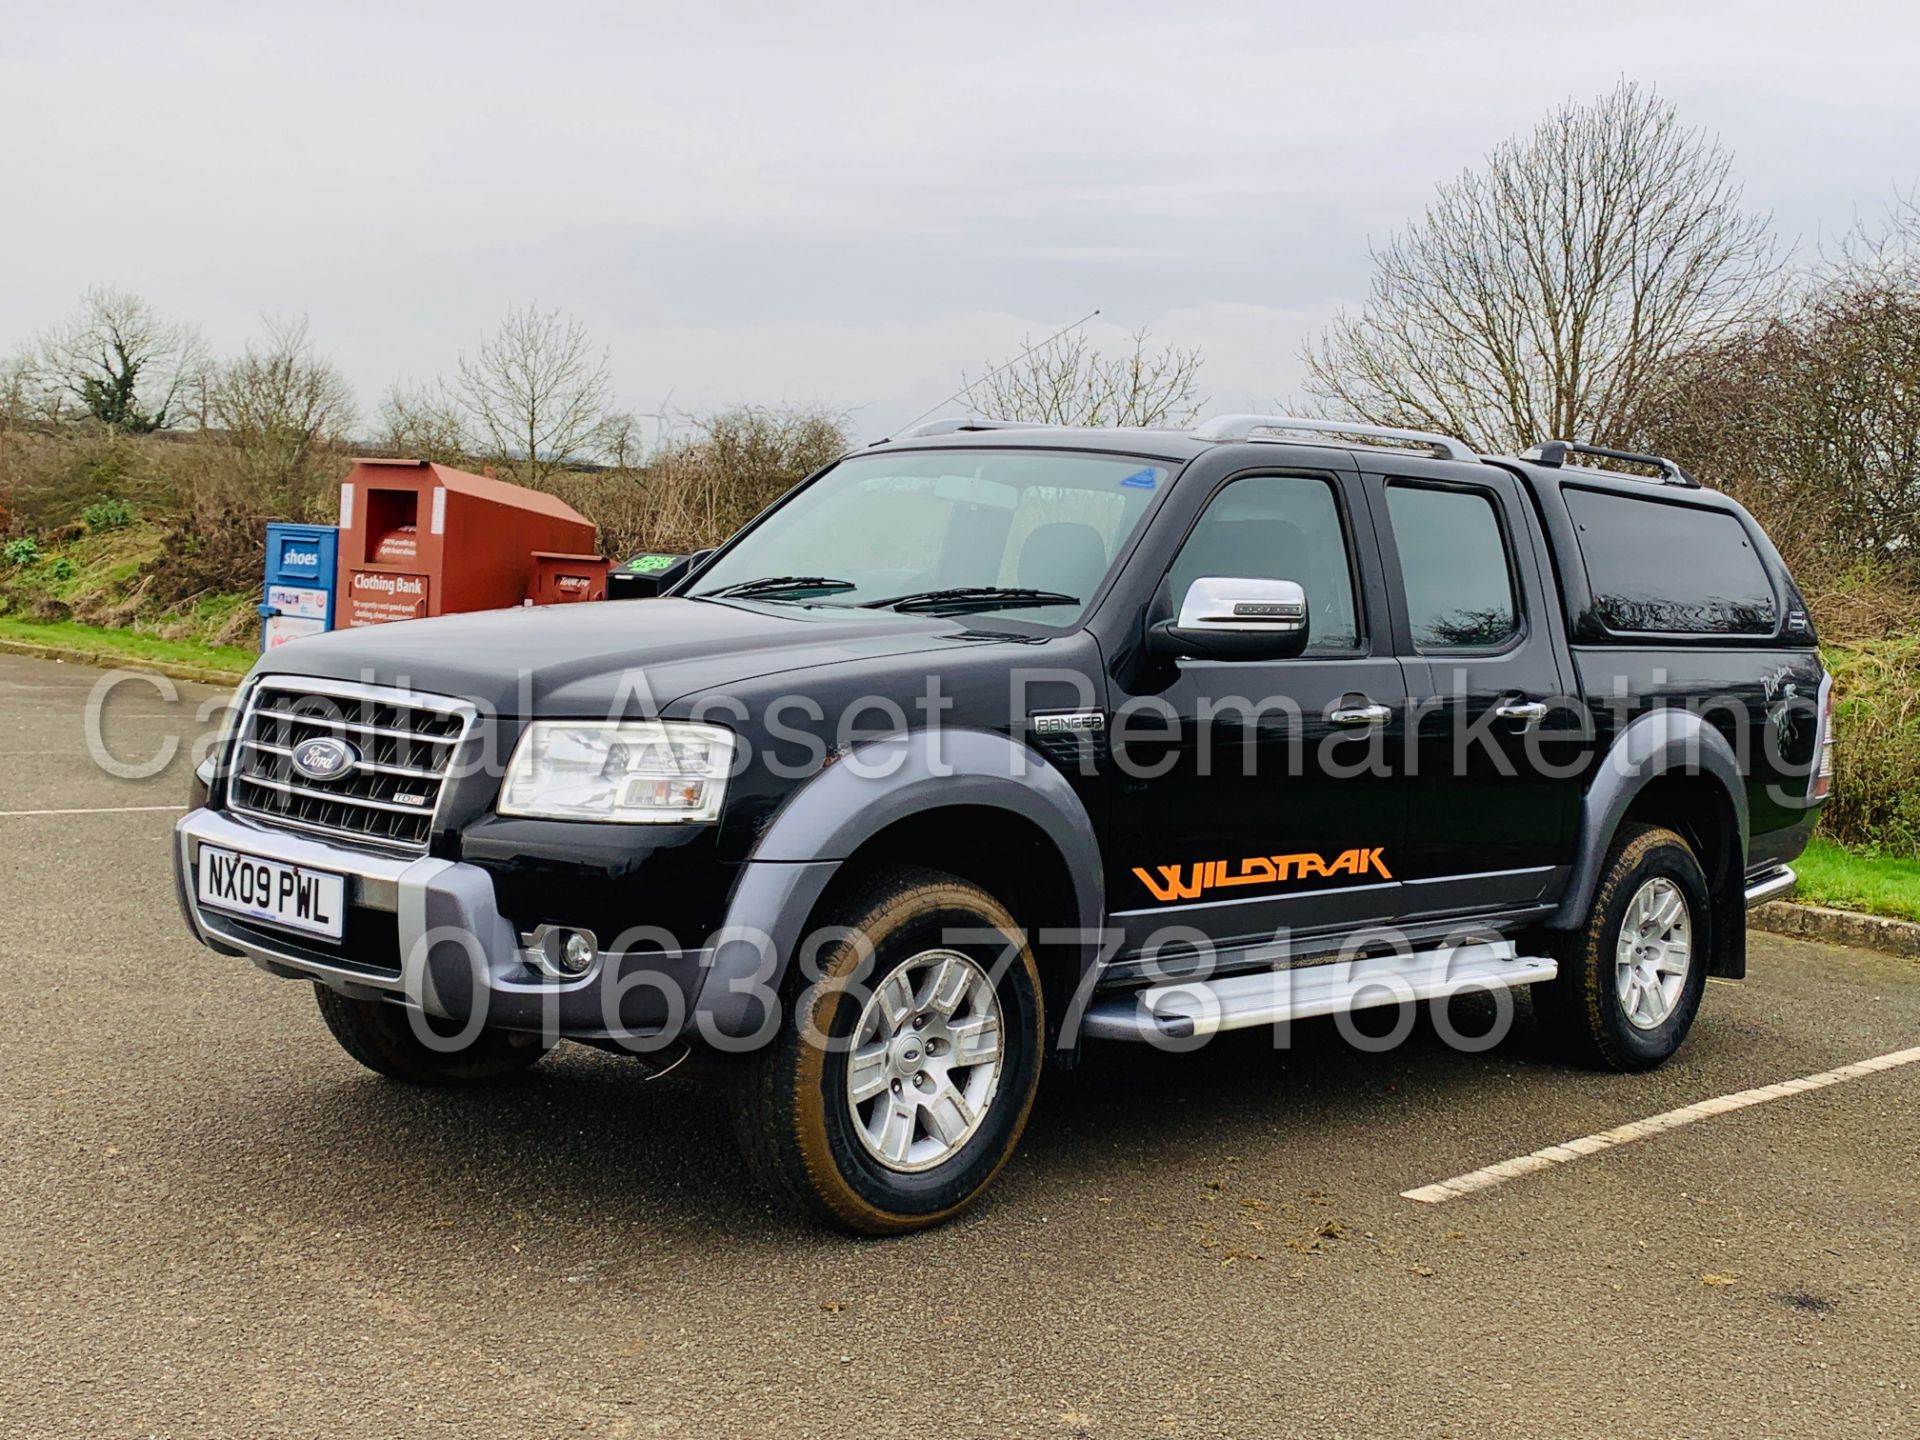 FORD RANGER *WILDTRAK* DOUBLE CAB PICK-UP *4X4* (2009) '3.0 TDCI - 156 BHP* (FULLY LOADED) - Image 5 of 37